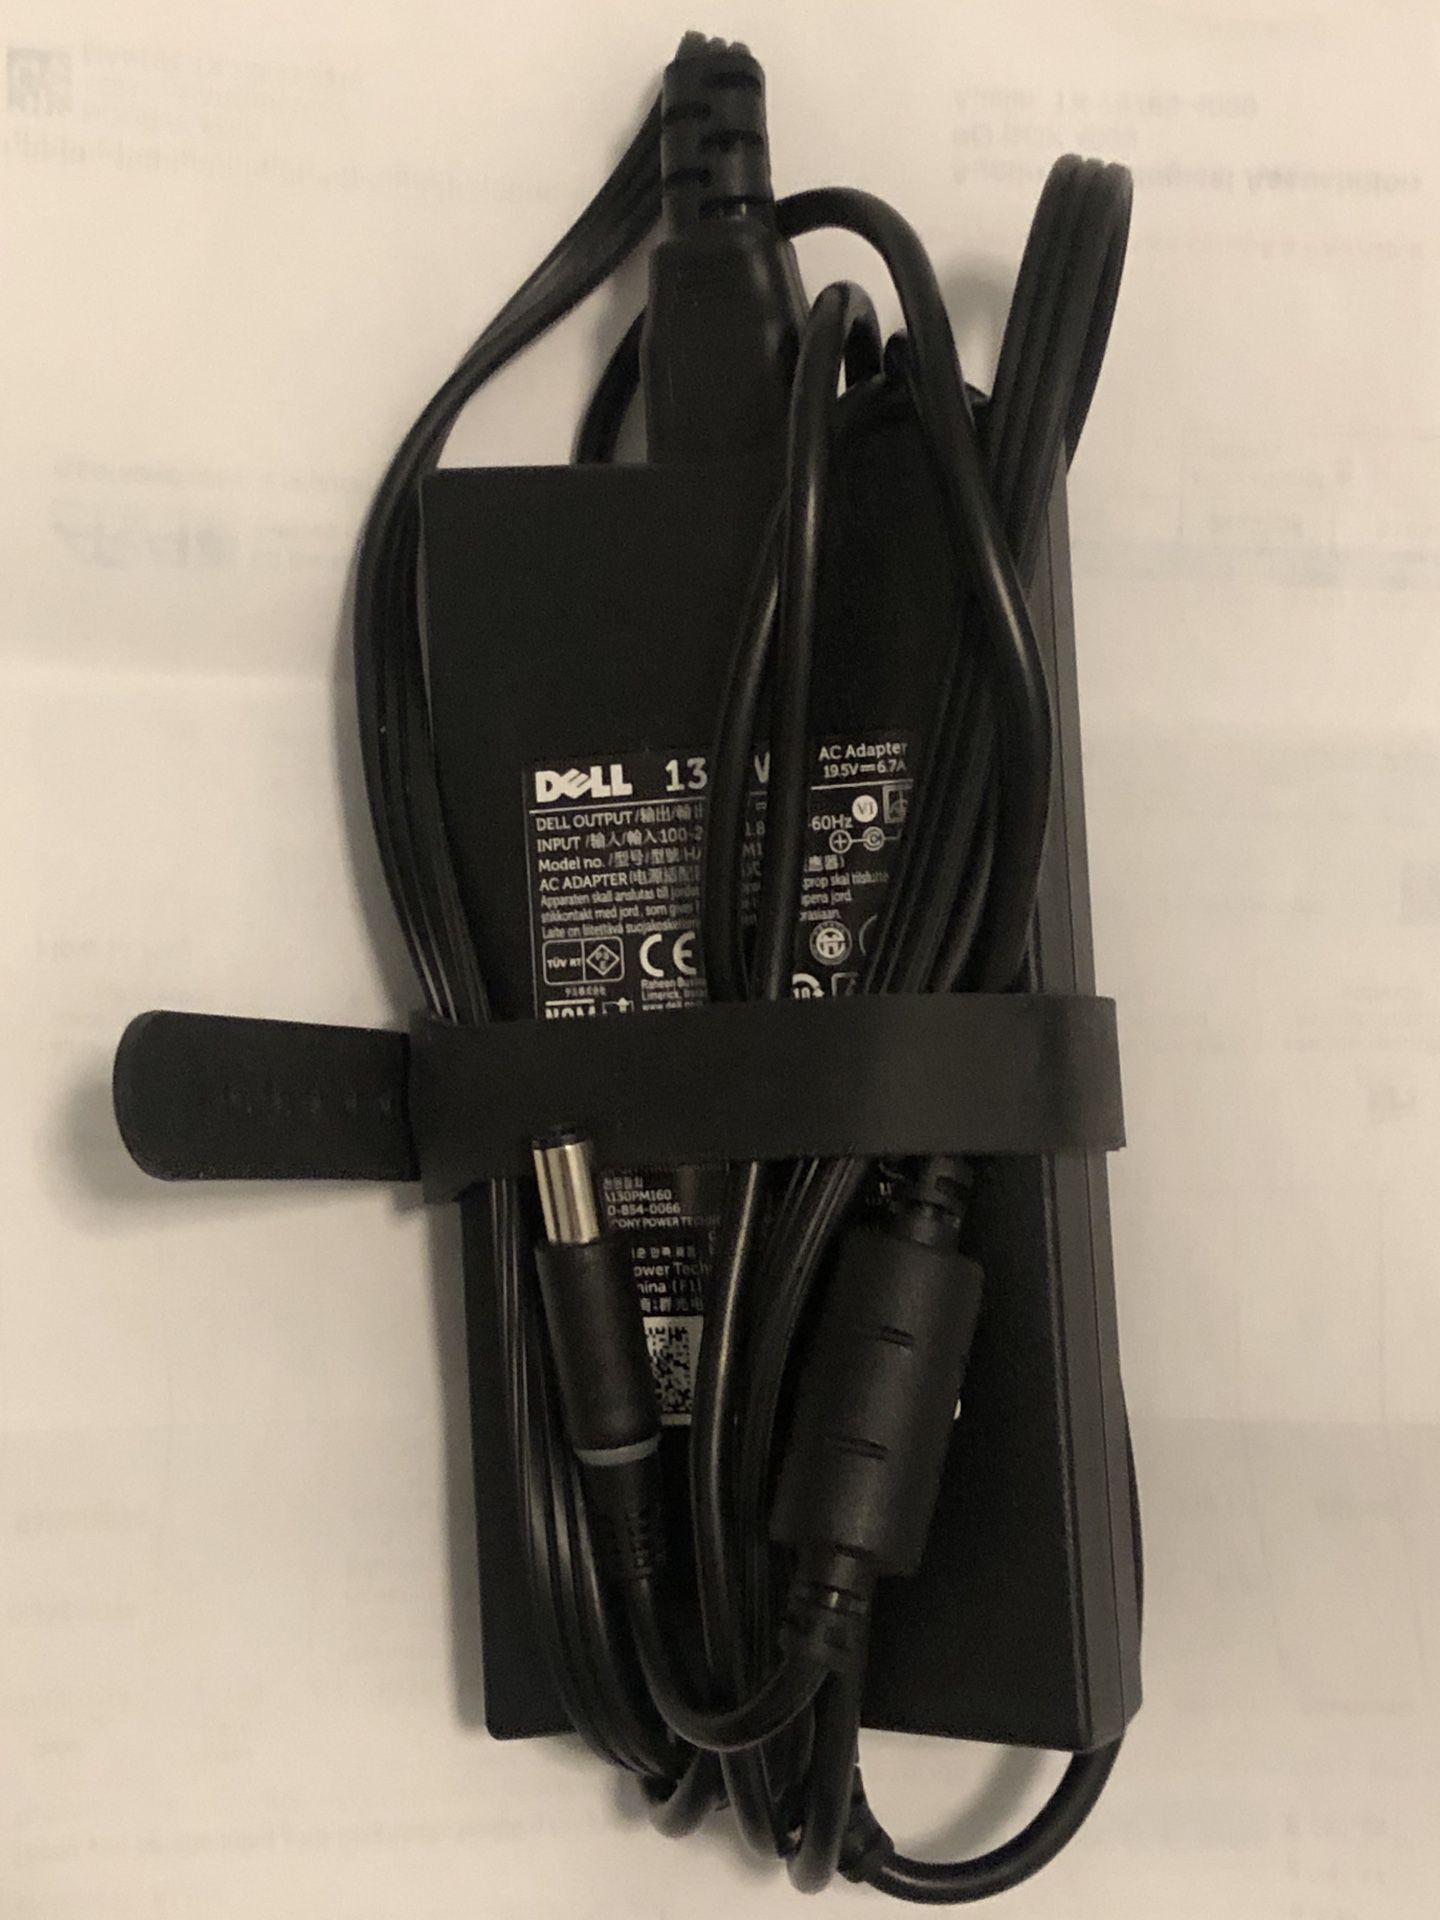 Dell 180W Charger (almost new) for Laptops and Docking Stations